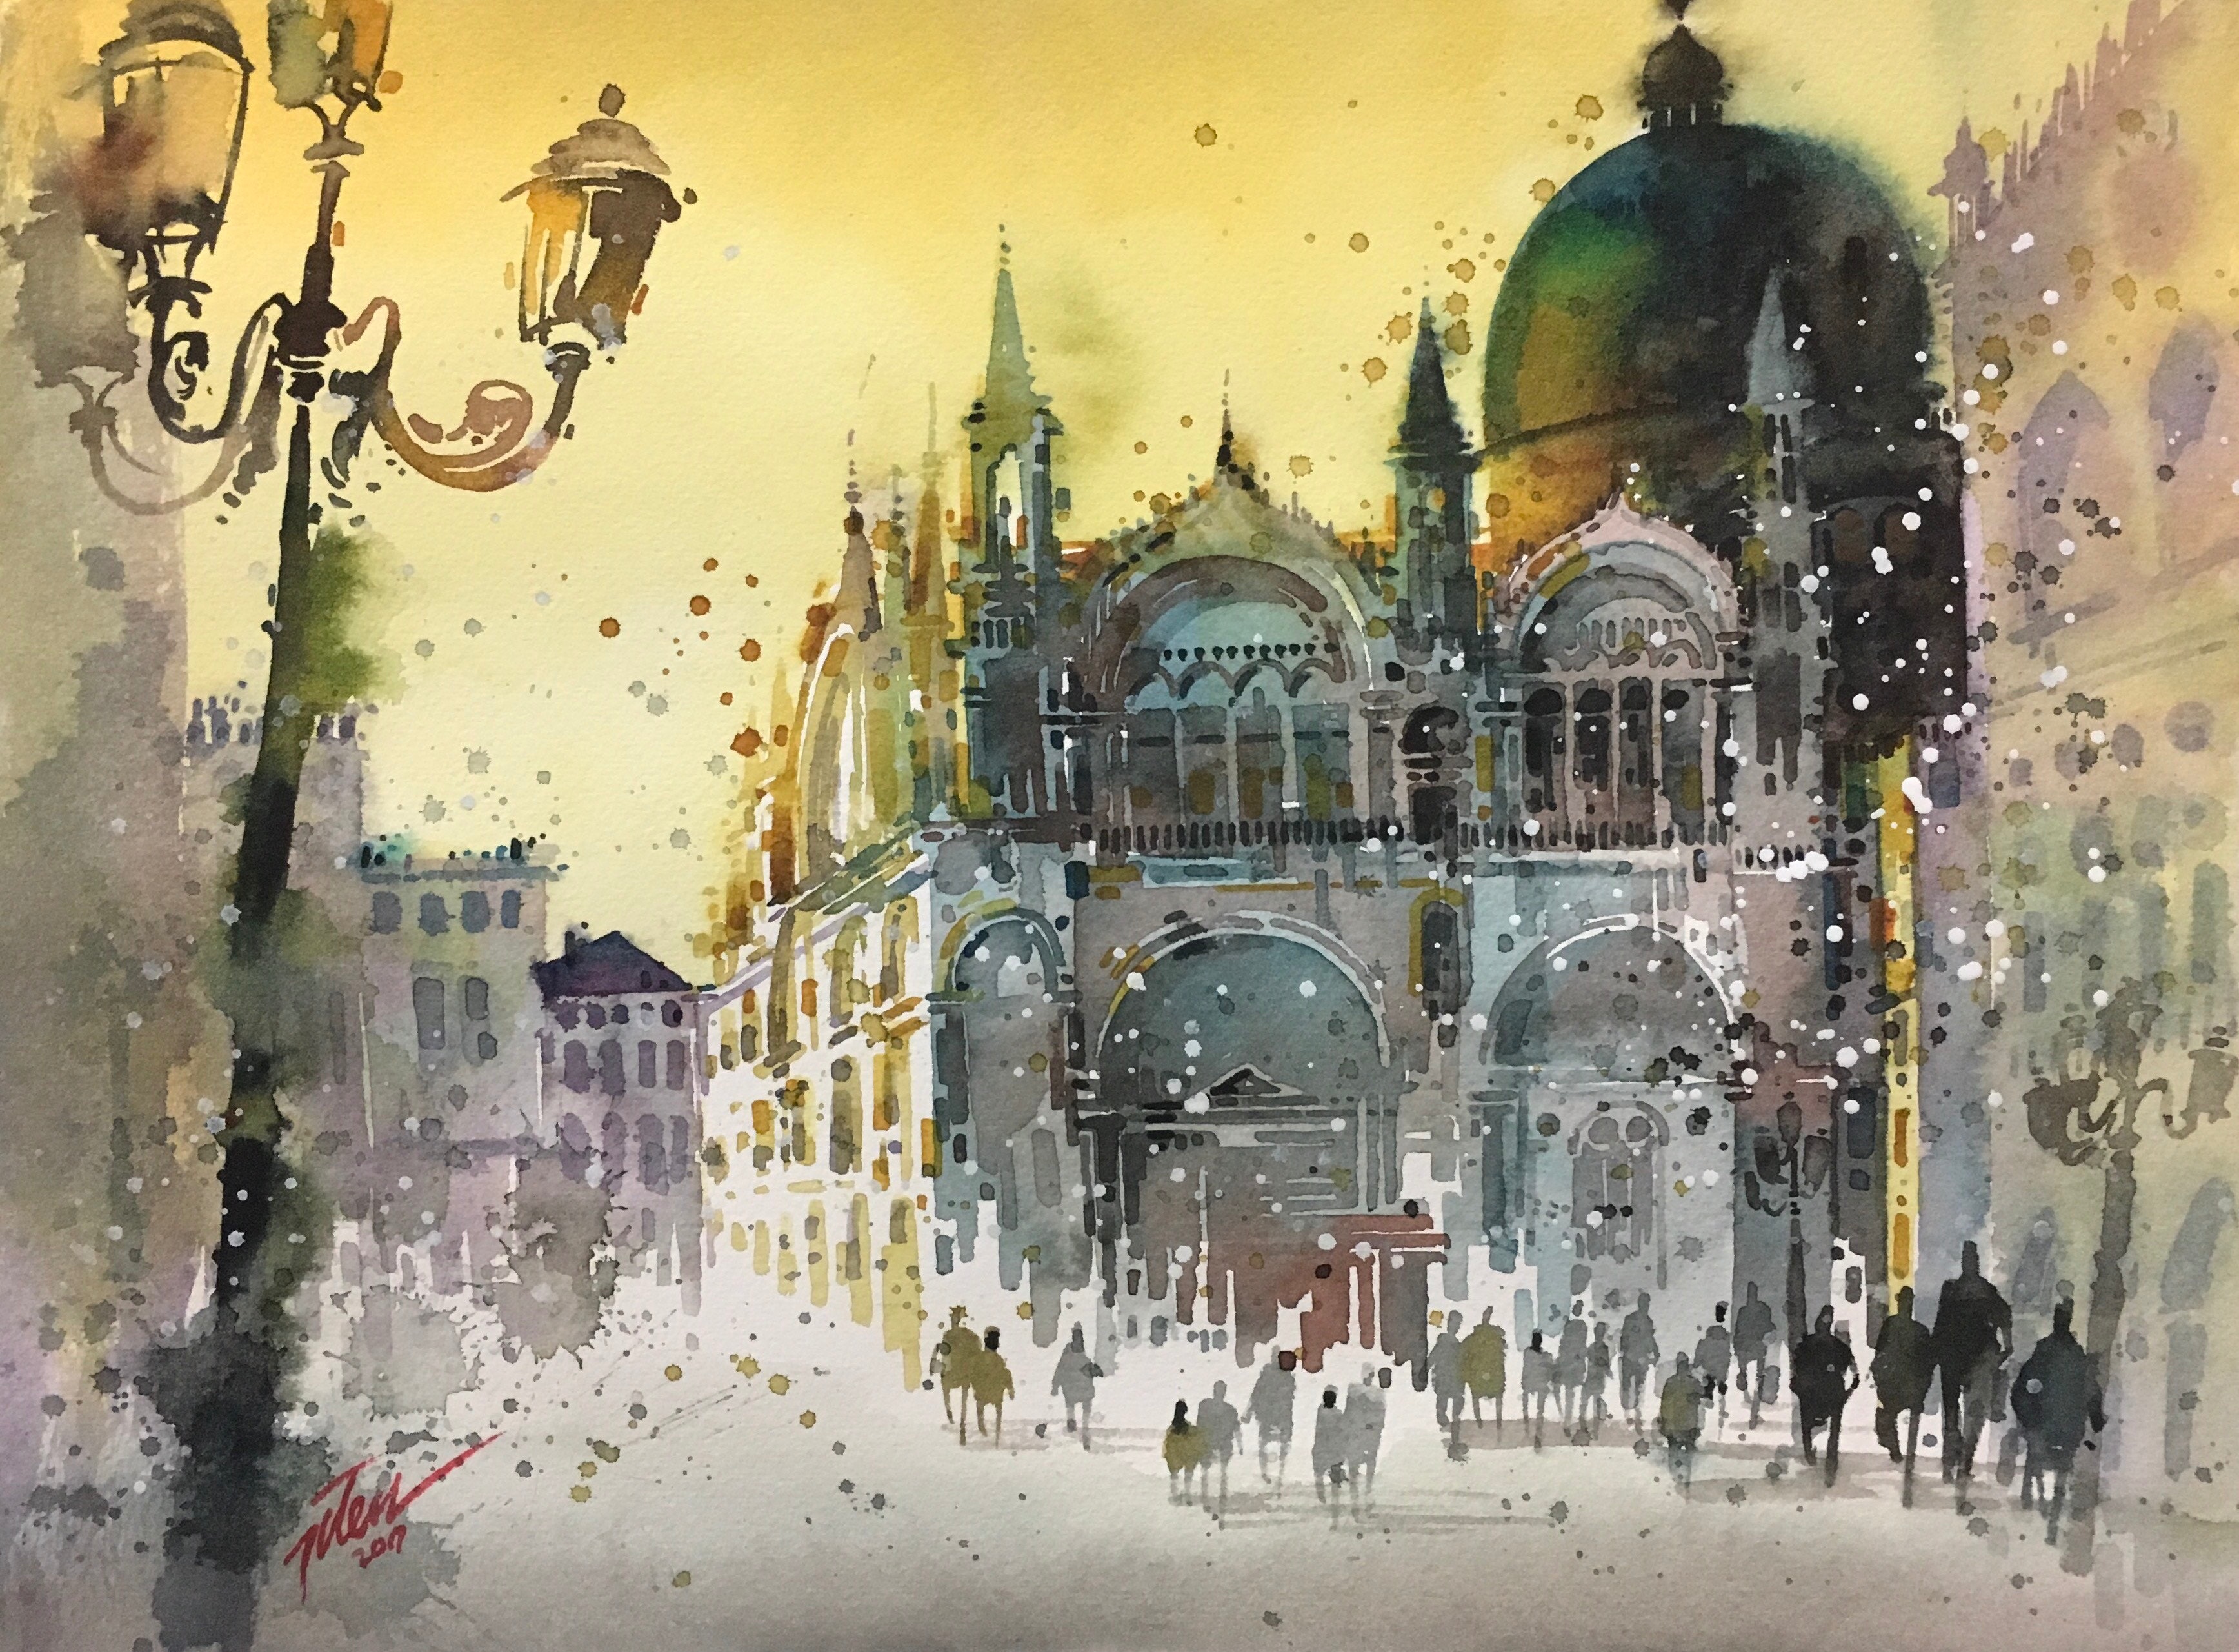 Tilen Ti, Crowds, Artwork, Architecture, Watercolor, Cathedral, Venice, Italy, Street light, Building, Splashes, Painting, Town square, Dome Wallpaper